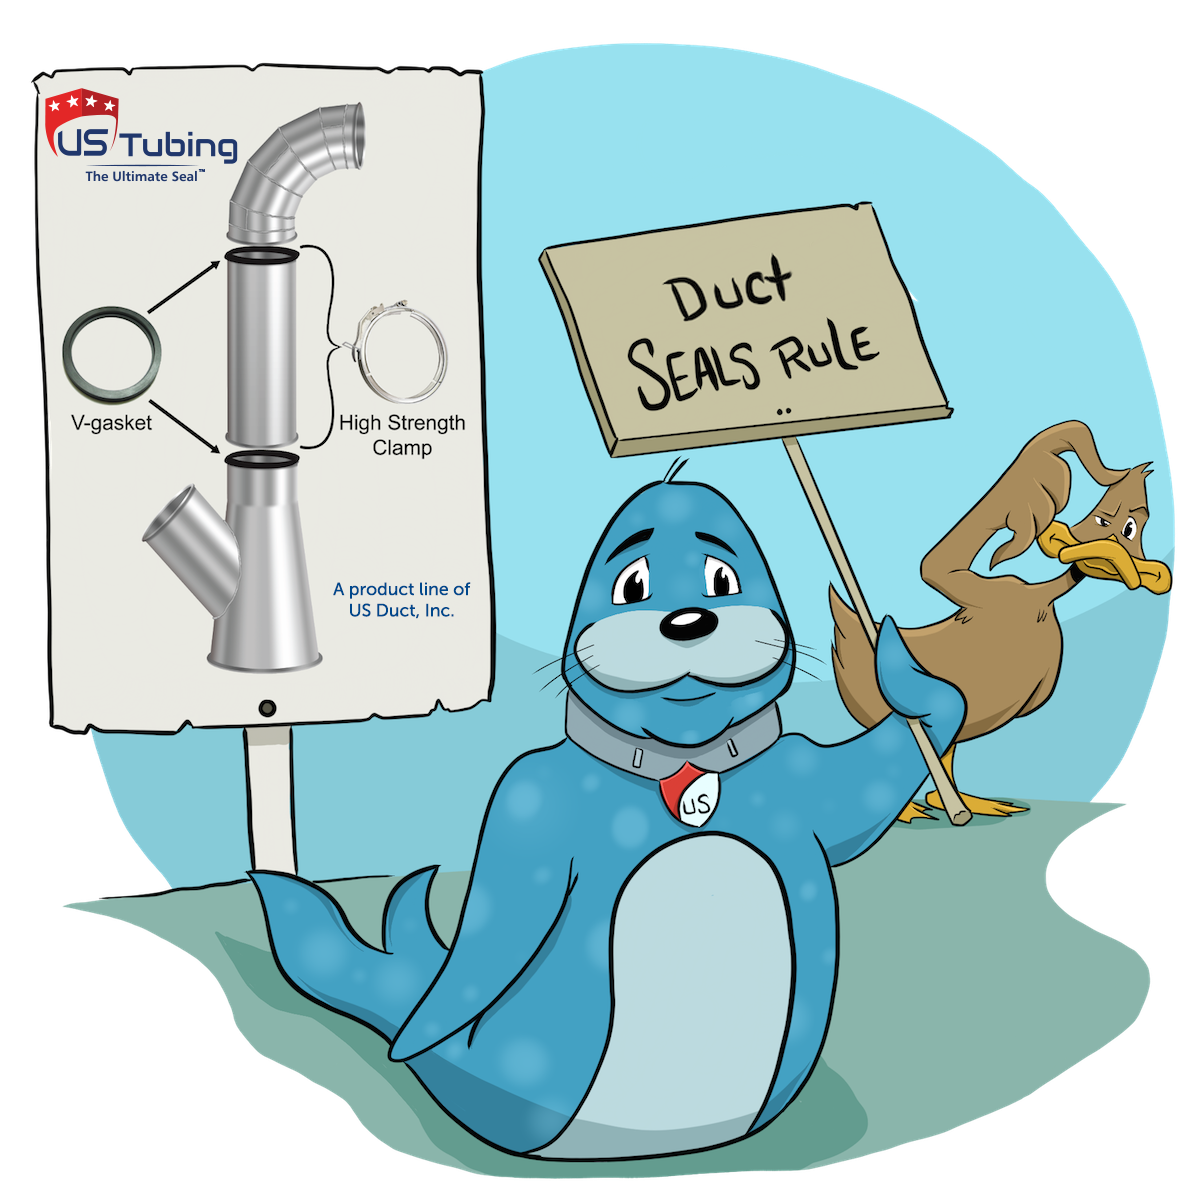 Cartoon seal holding a sign that says "seals rule ducks drool" to promote US Tubing.